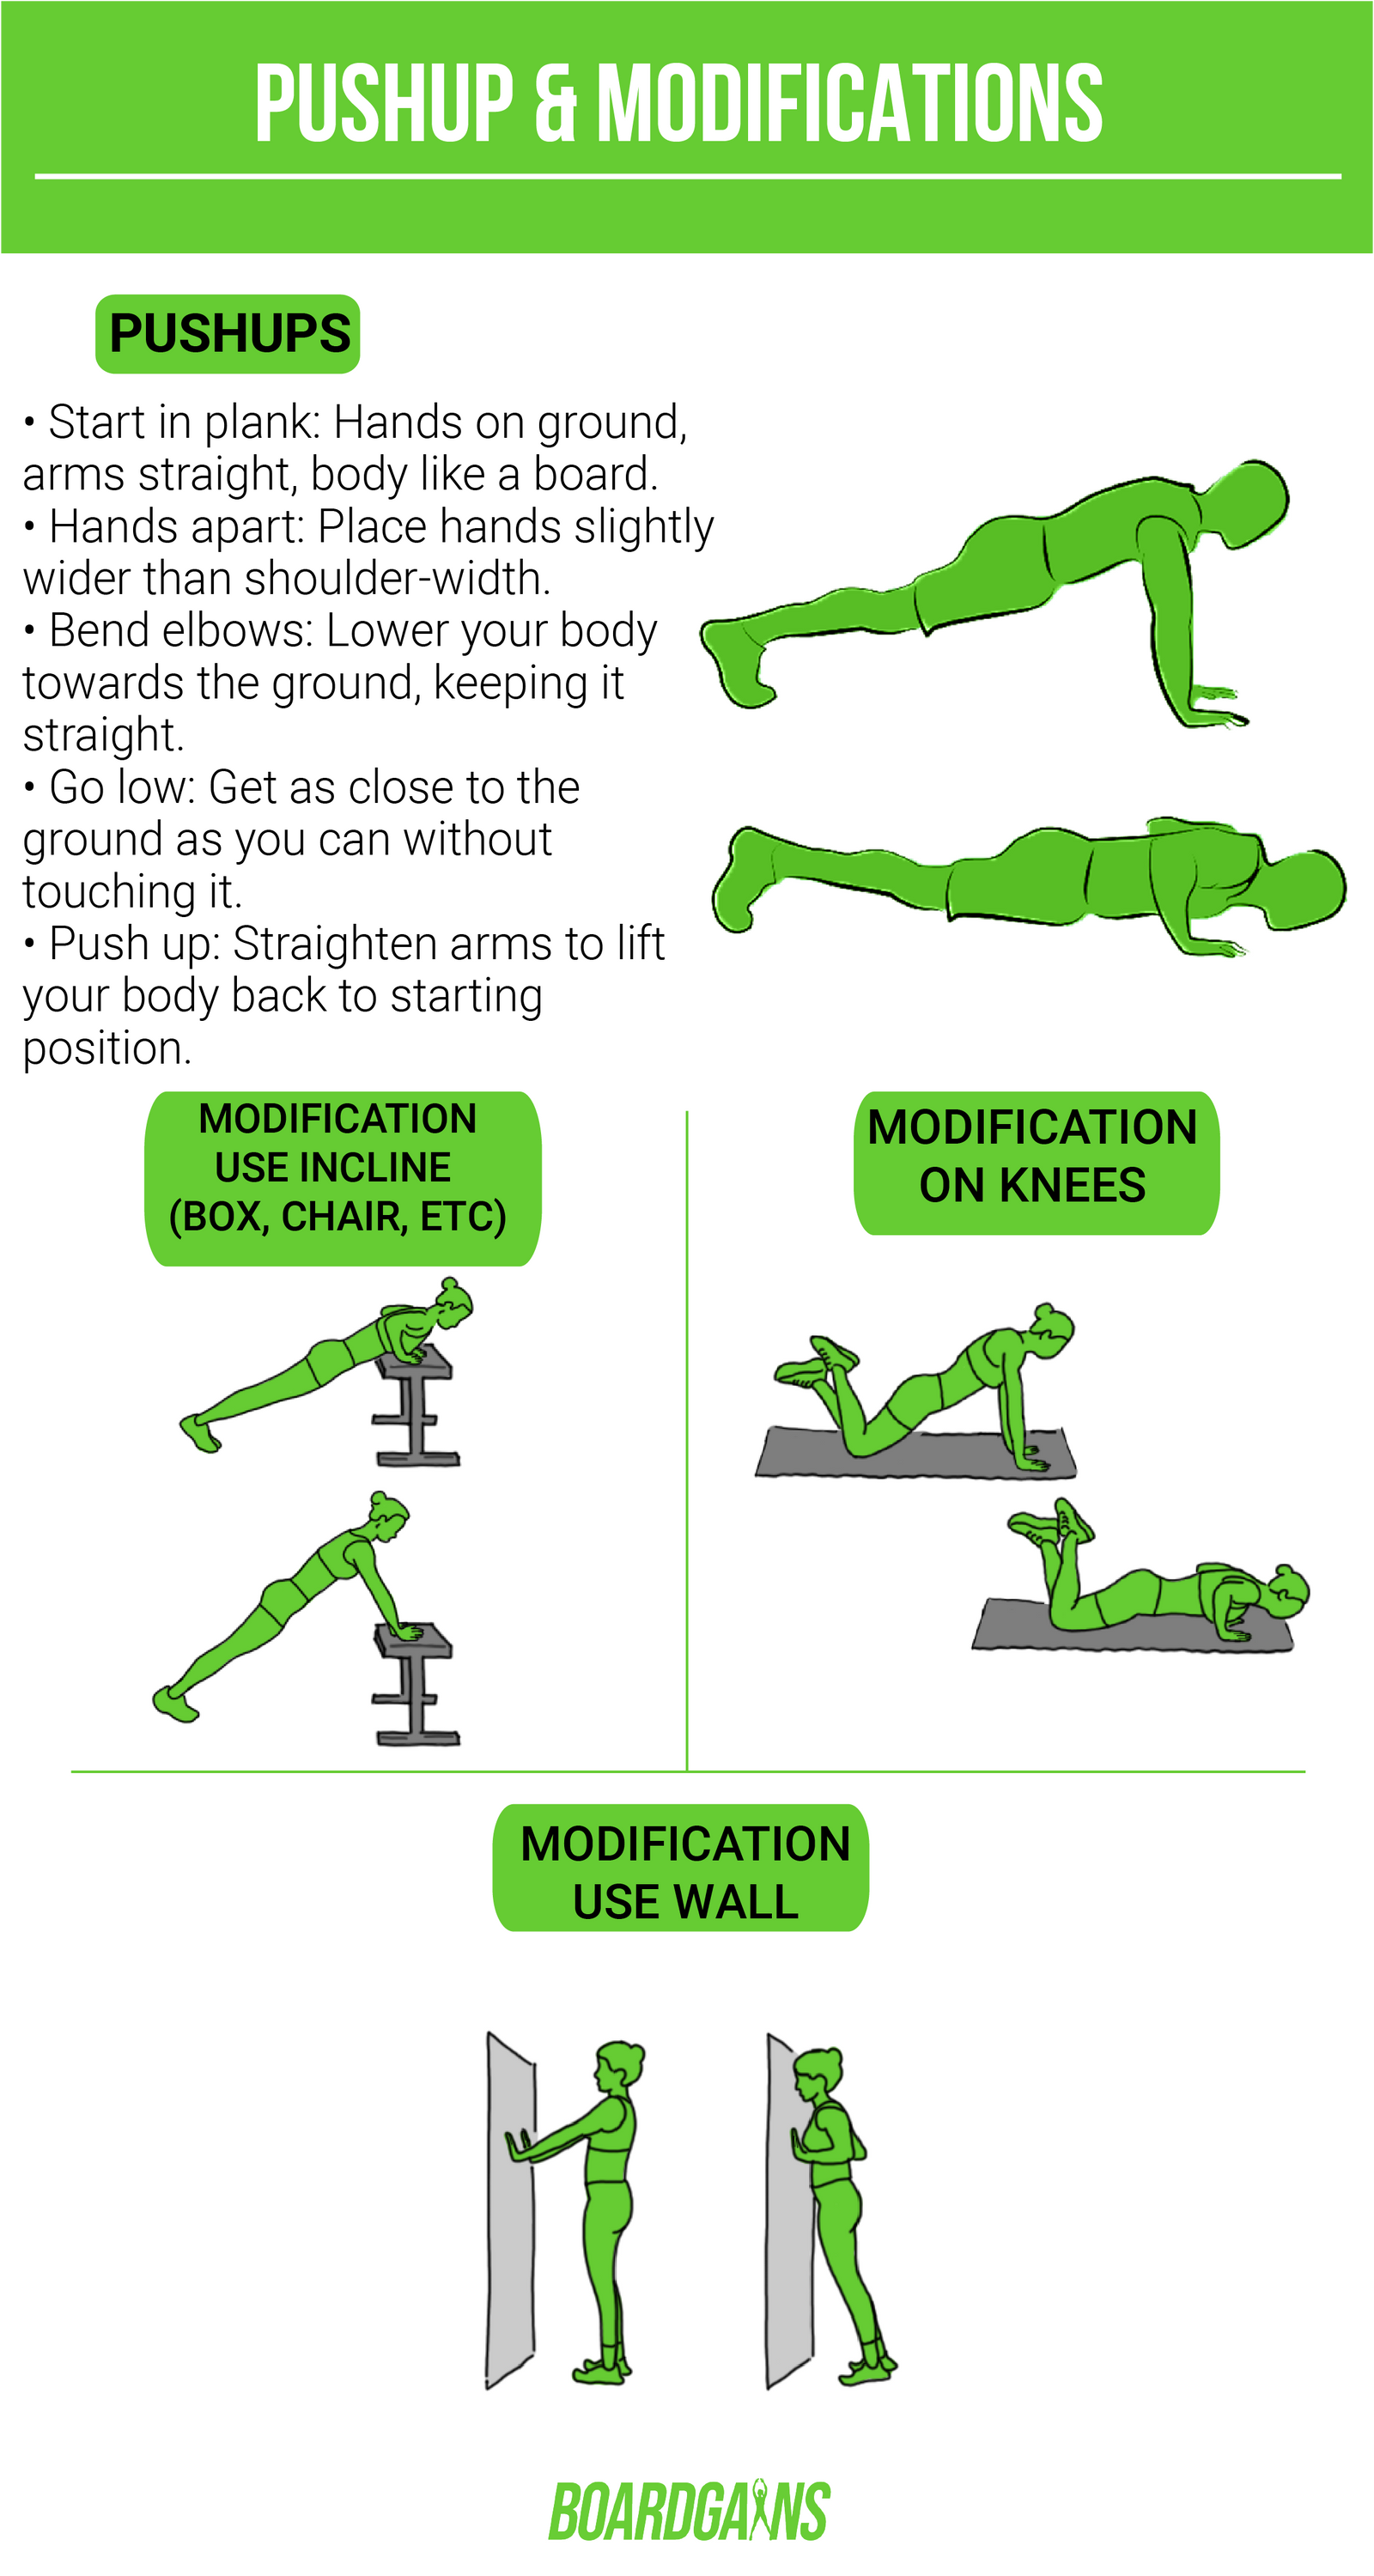 PUSH UP VARIATIONS: BEGINNER TO EXPERT - Cali Move